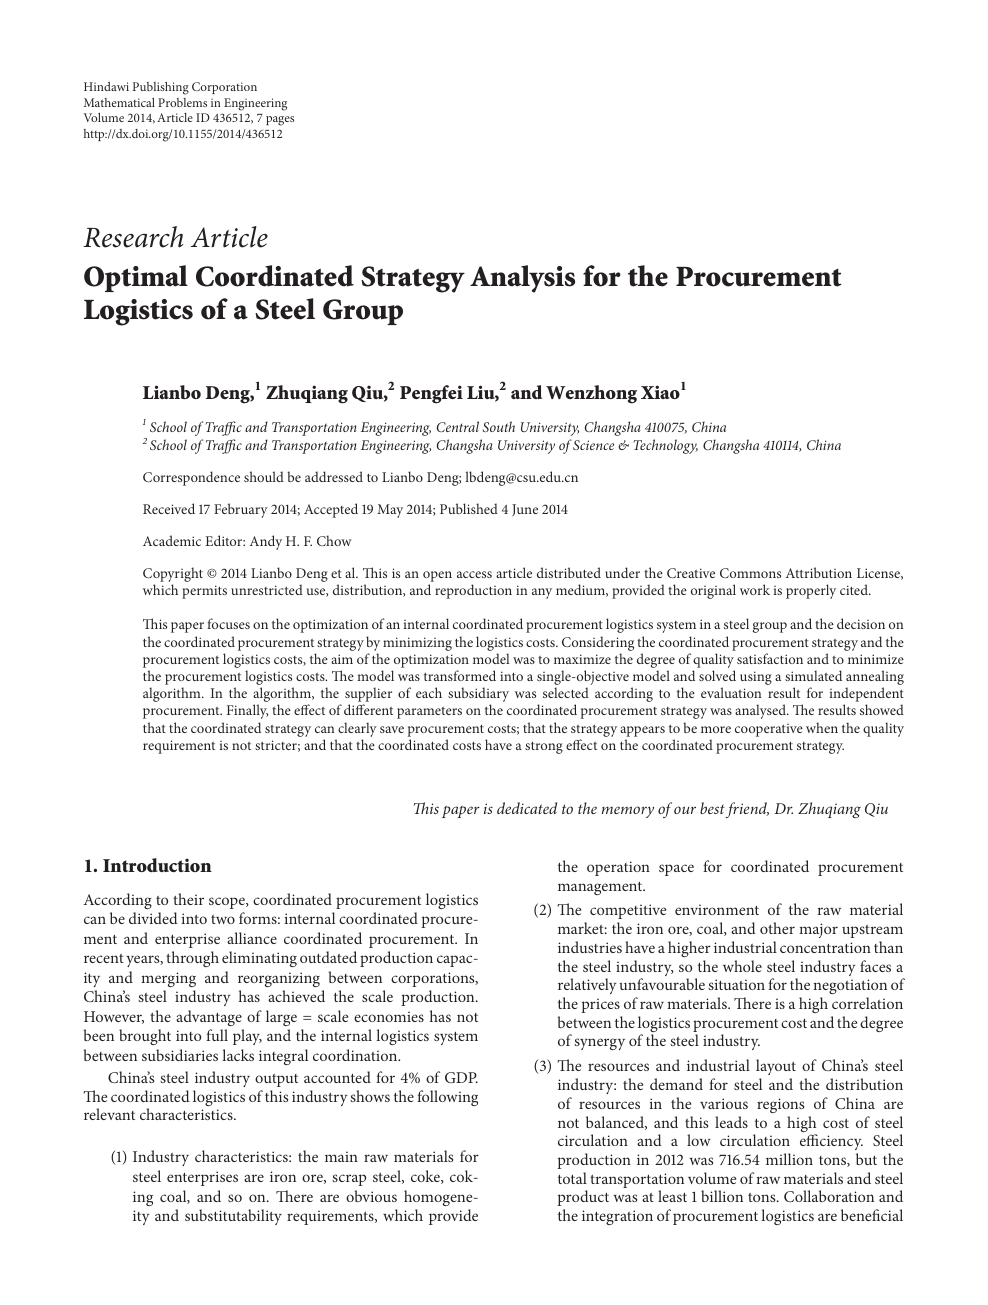 Optimal Coordinated Strategy Analysis For The Procurement Logistics Of A Steel Group Topic Of Research Paper In Mathematics Download Scholarly Article Pdf And Read For Free On Cyberleninka Open Science Hub